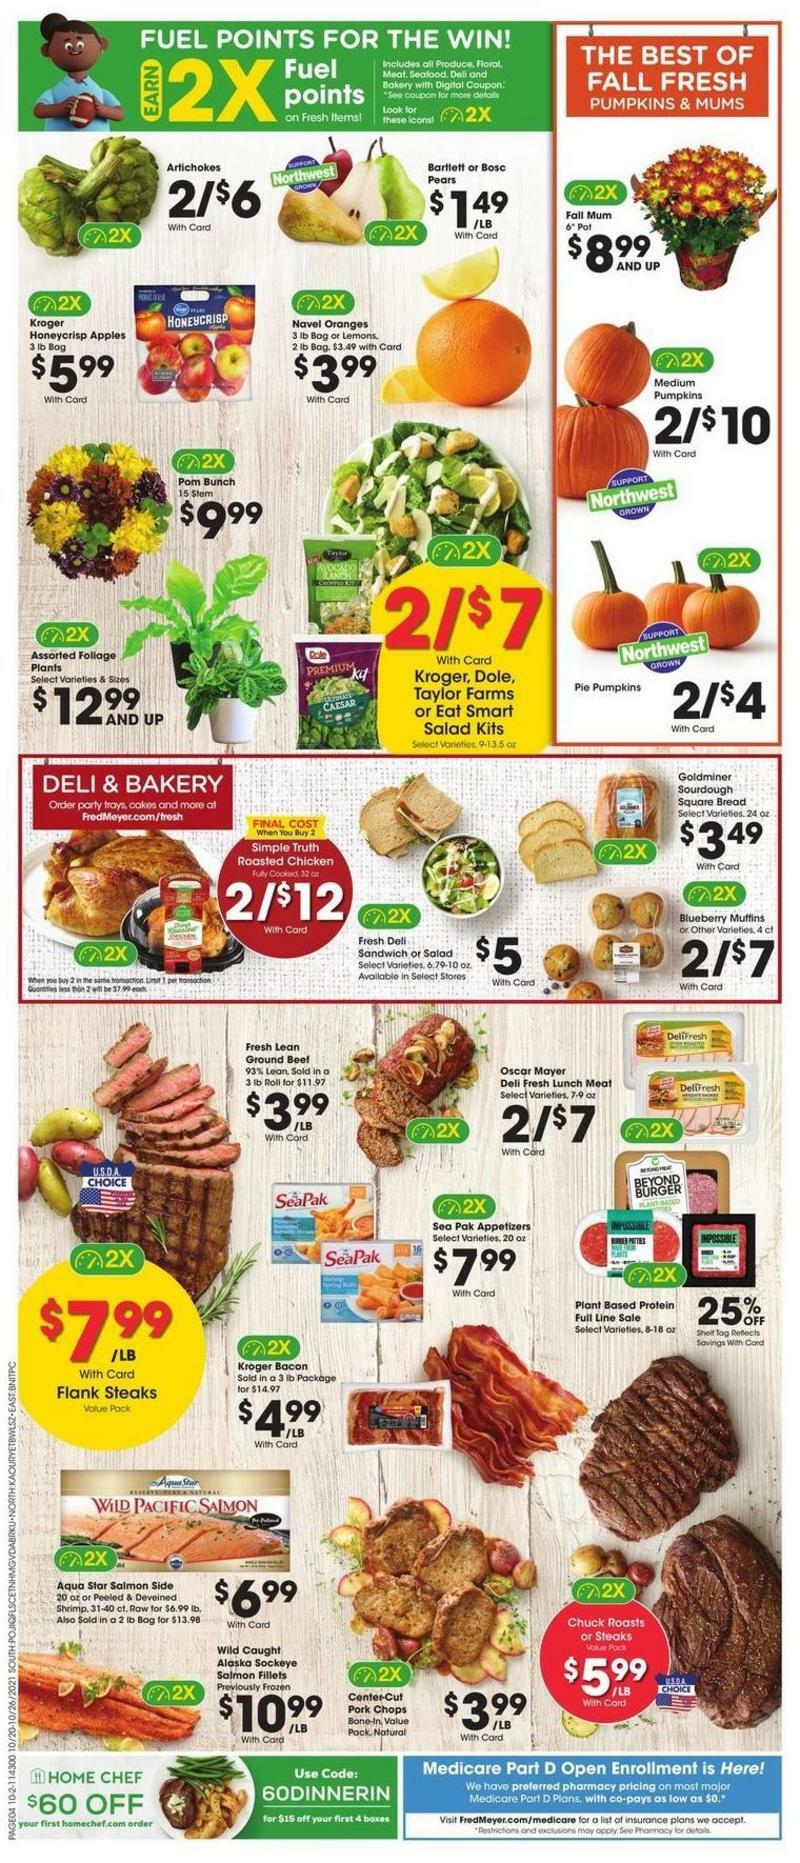 Fred Meyer Weekly Ad from October 20